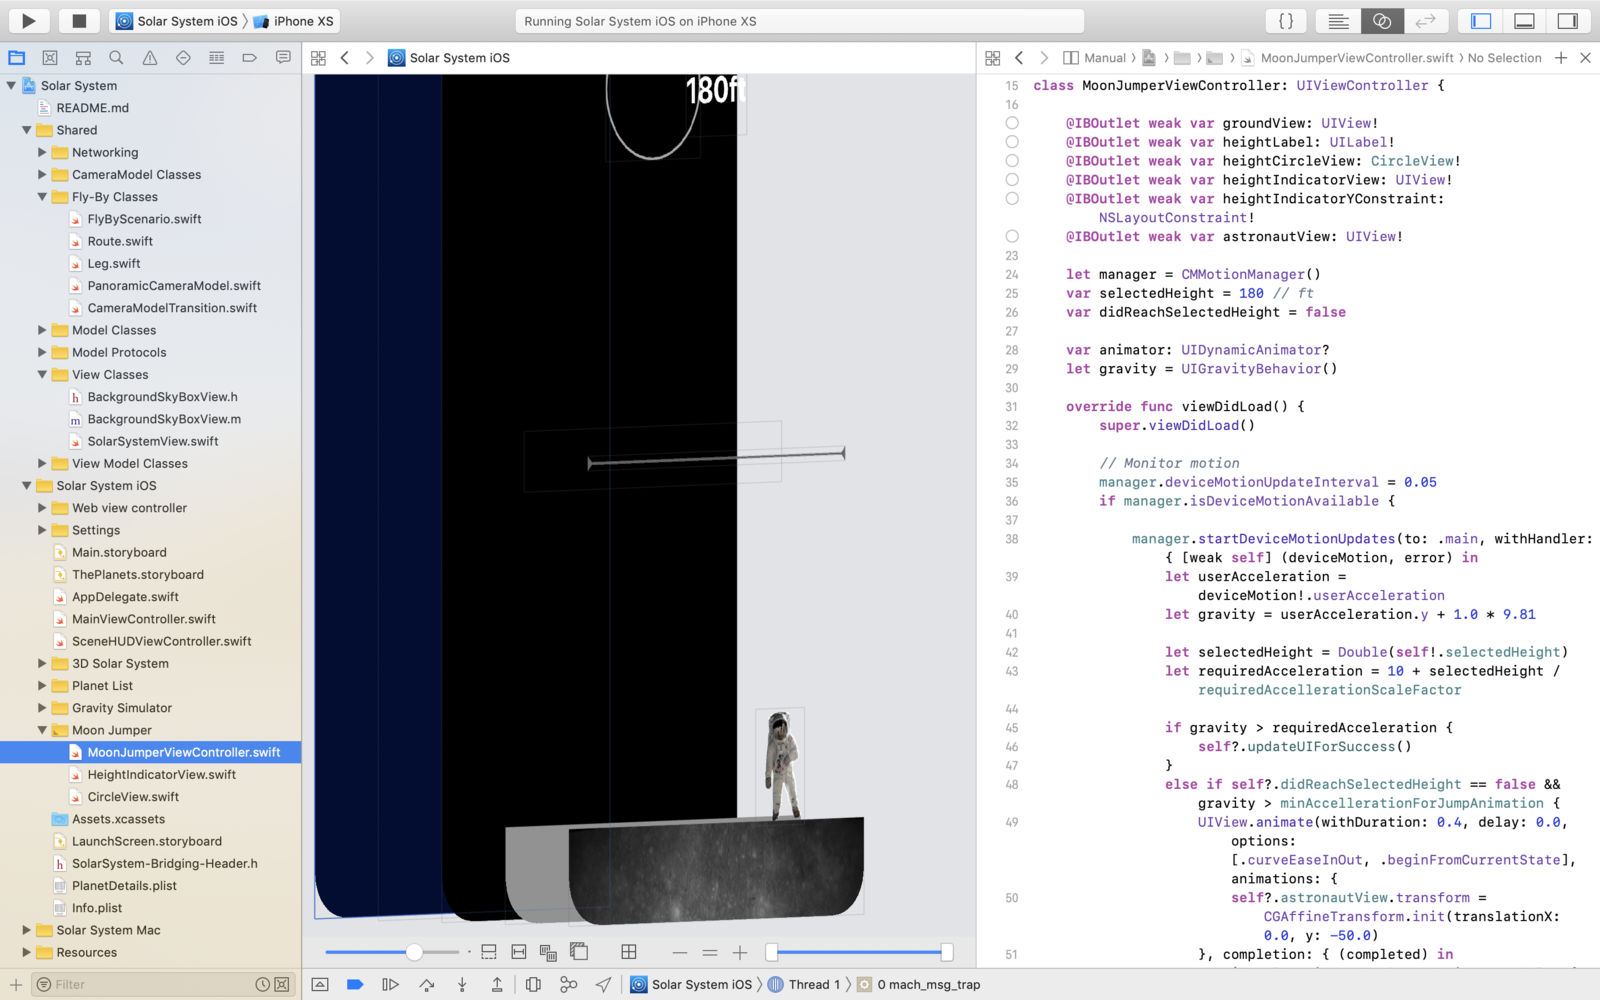 xcode for mac os x lion